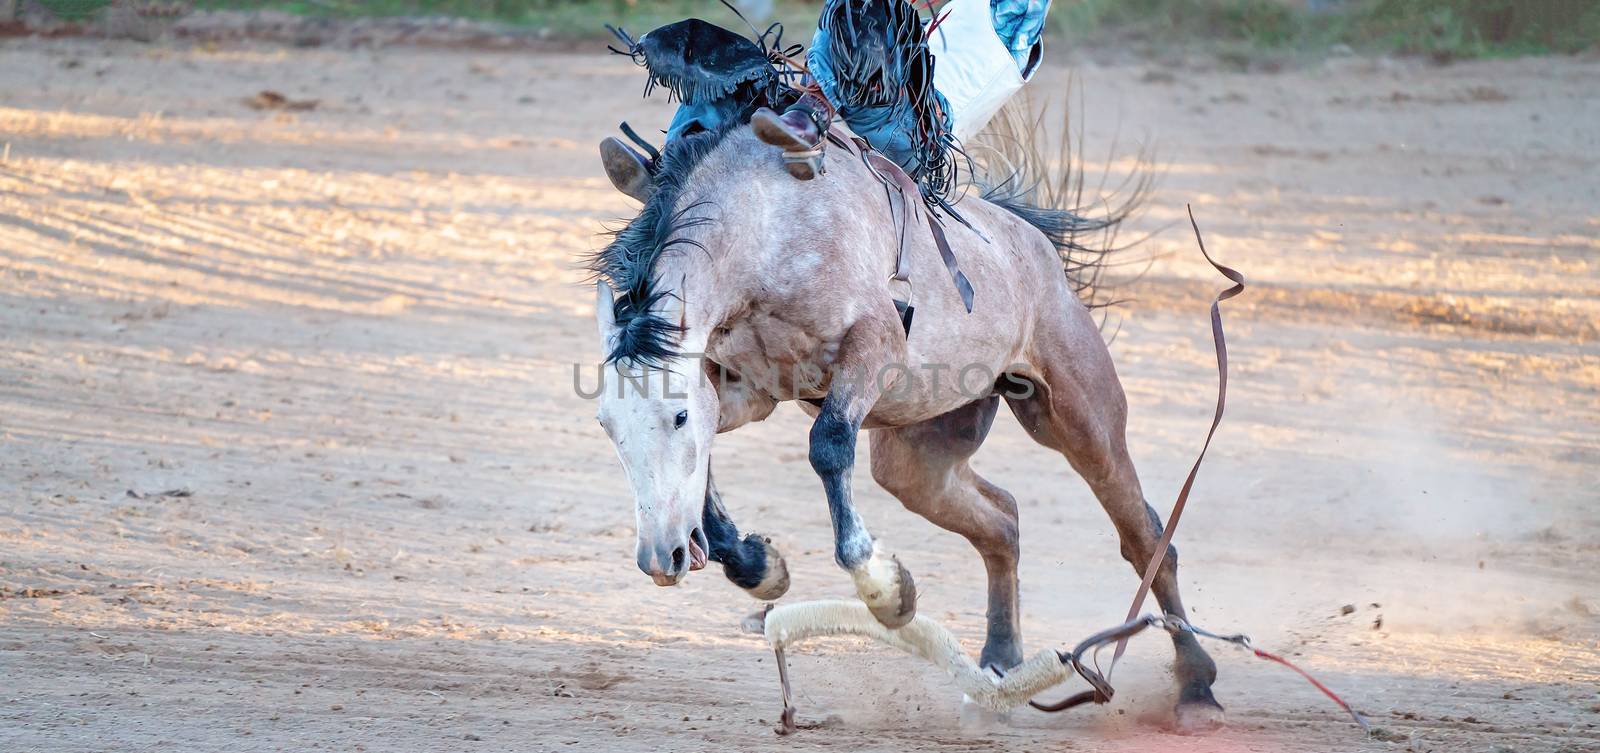 Cowboy rides an energetic bucking bronc horse in a sanctioned competition event at a country rodeo